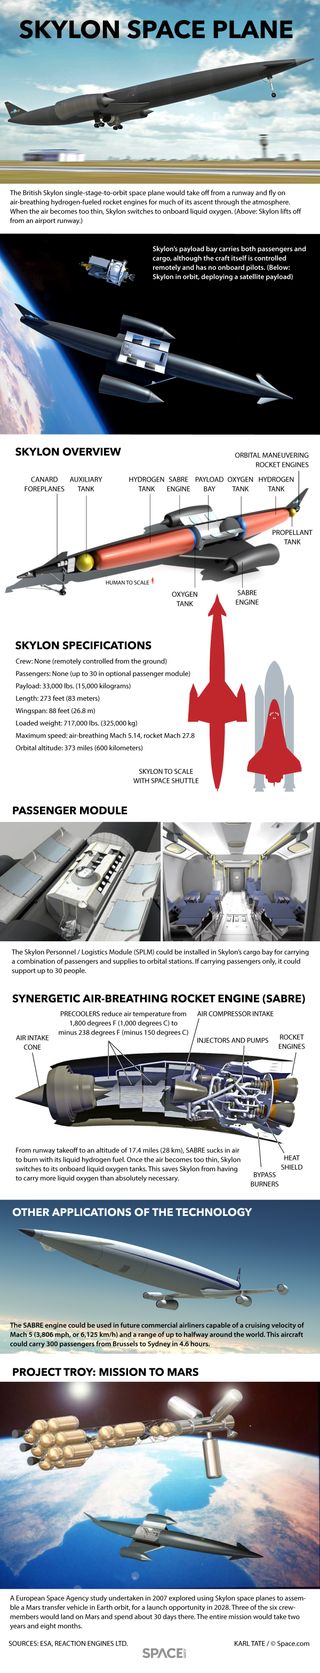 The British company Reaction Engines Ltd. hopes to manufacture Skylon, a runway-to-orbit space plane using hybrid air-breathing rocket engines. See how Skylon works in our full infographic.